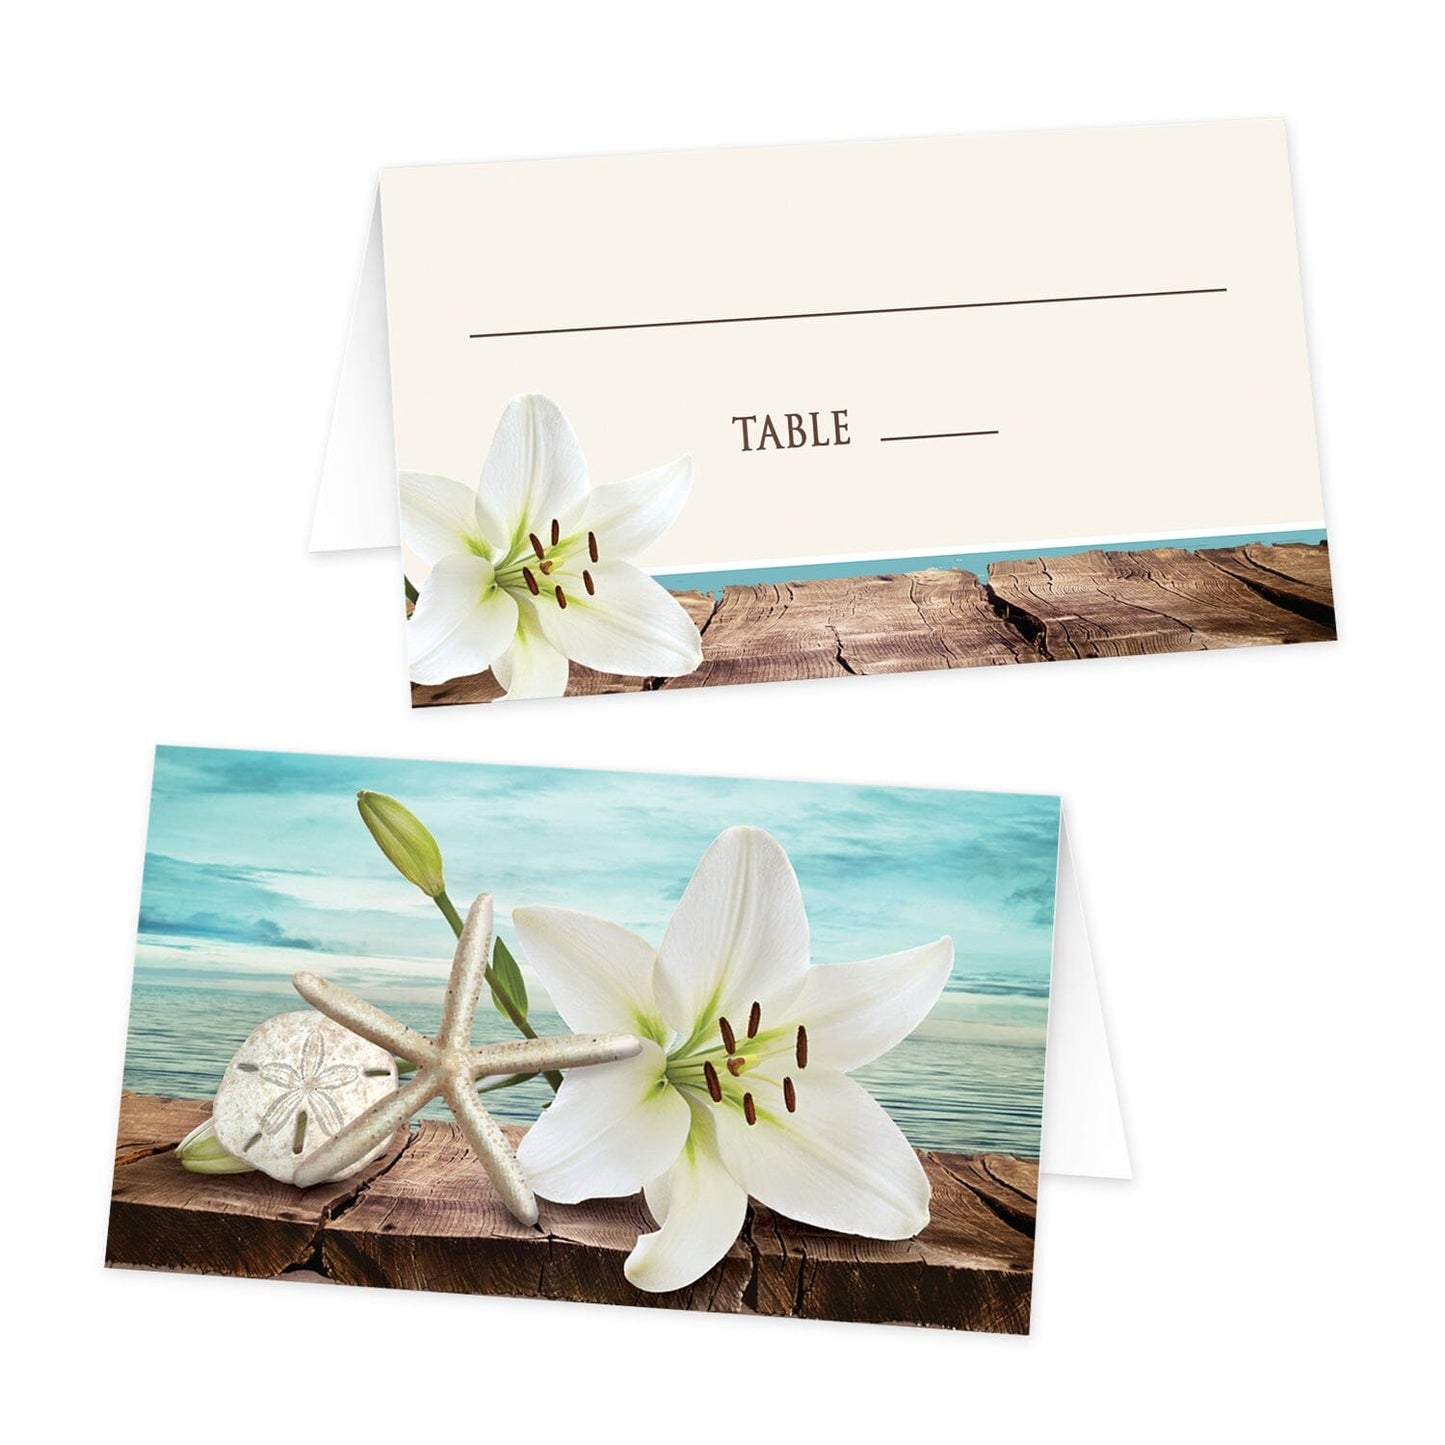 Lily Seashells and Sand Beach Folded Place Cards at Artistically Invited. Beautiful lily seashells and sand beach folded place cards designed with a pretty lily and seashells on a rustic brown wood dock over a turquoise sky and open water on the one side of the folded cards and your lines for writing the guest's name and table number over a beige sand-colored background on the other side.